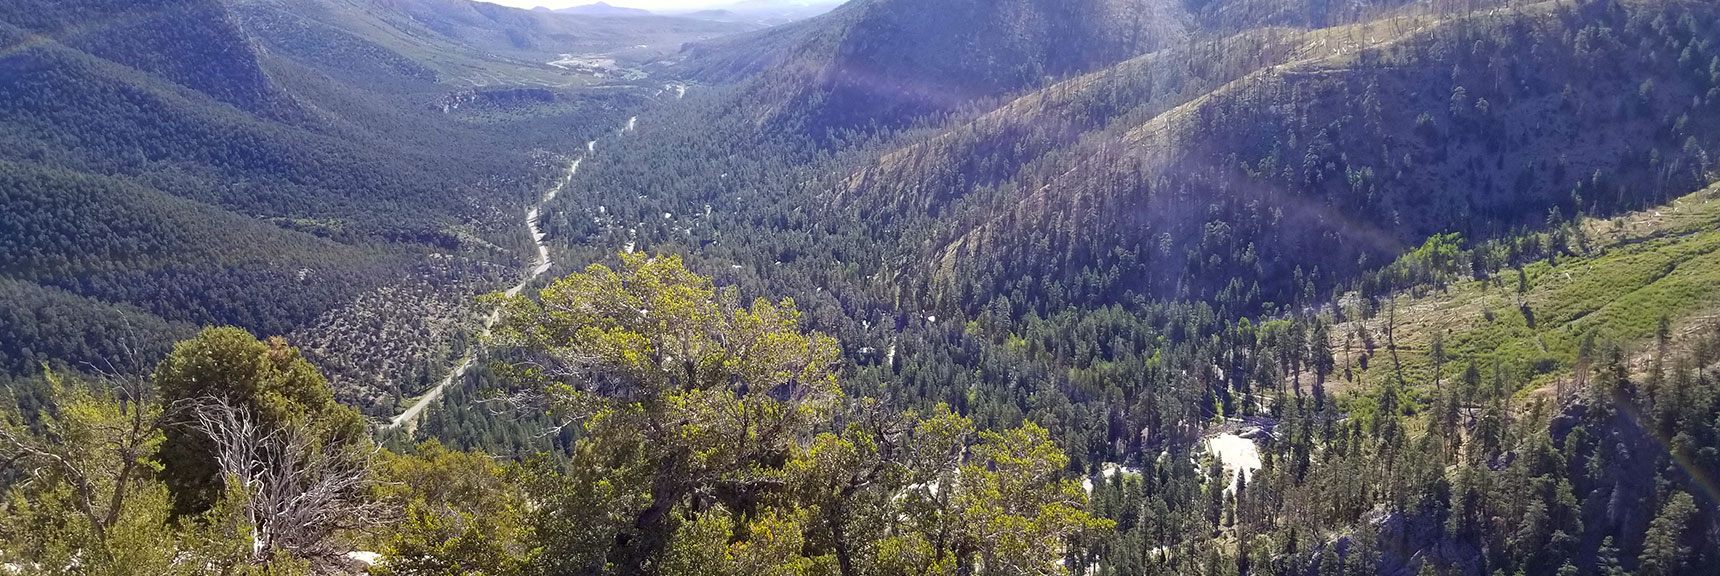 View Down Kyle Canyon from Cathedral Rock Summit, Mt. Charleston Wilderness, Nevada